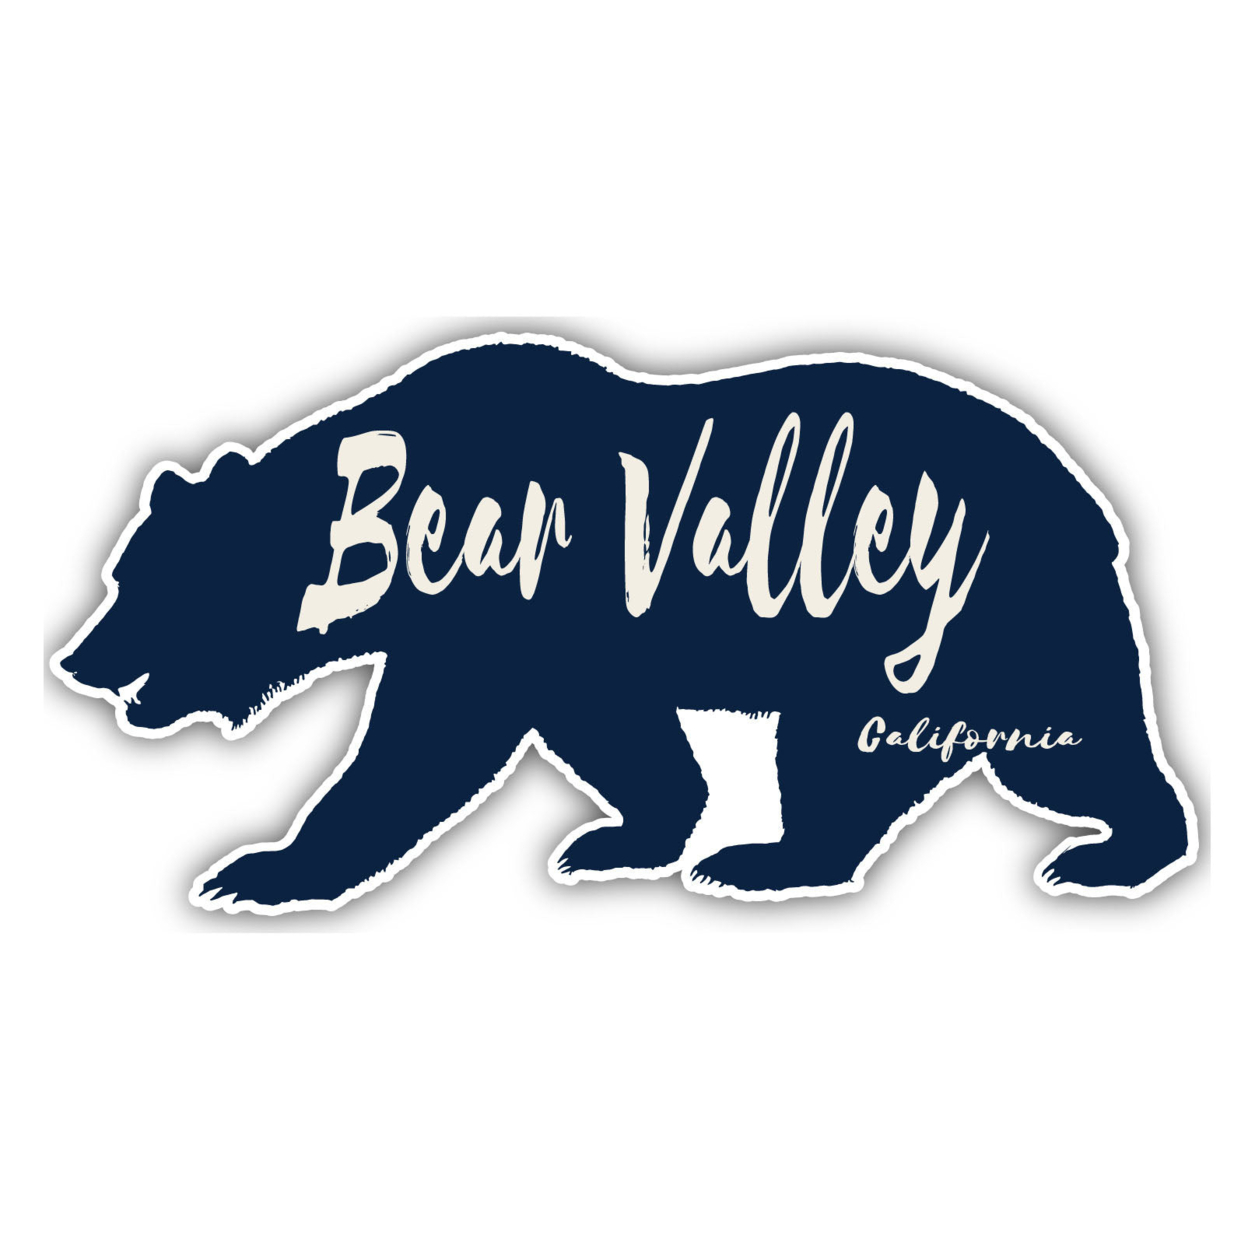 Bear Valley California Souvenir Decorative Stickers (Choose Theme And Size) - 4-Pack, 2-Inch, Bear